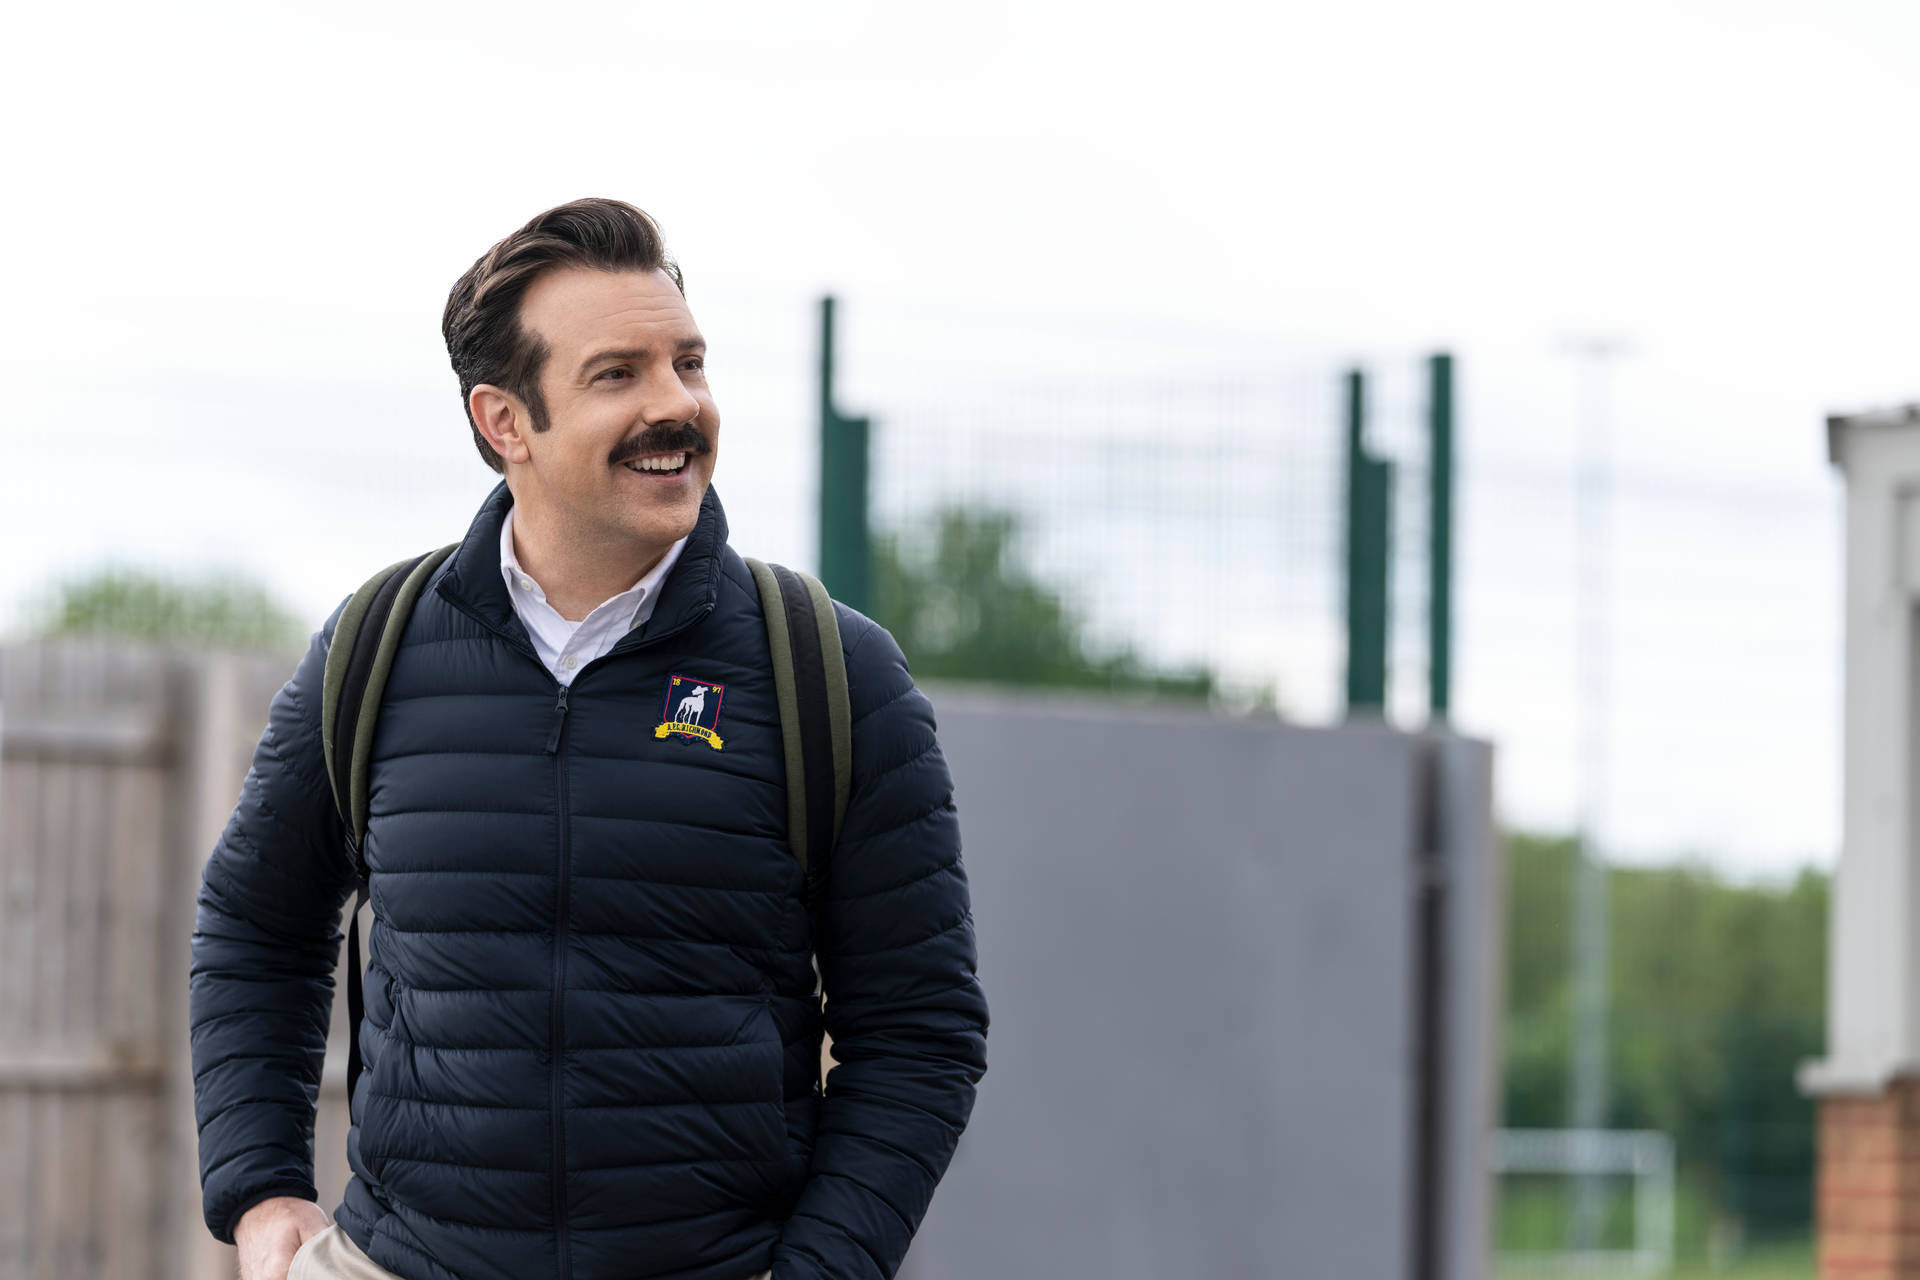 Cheerful Ted Lasso Wearing Jacket Background